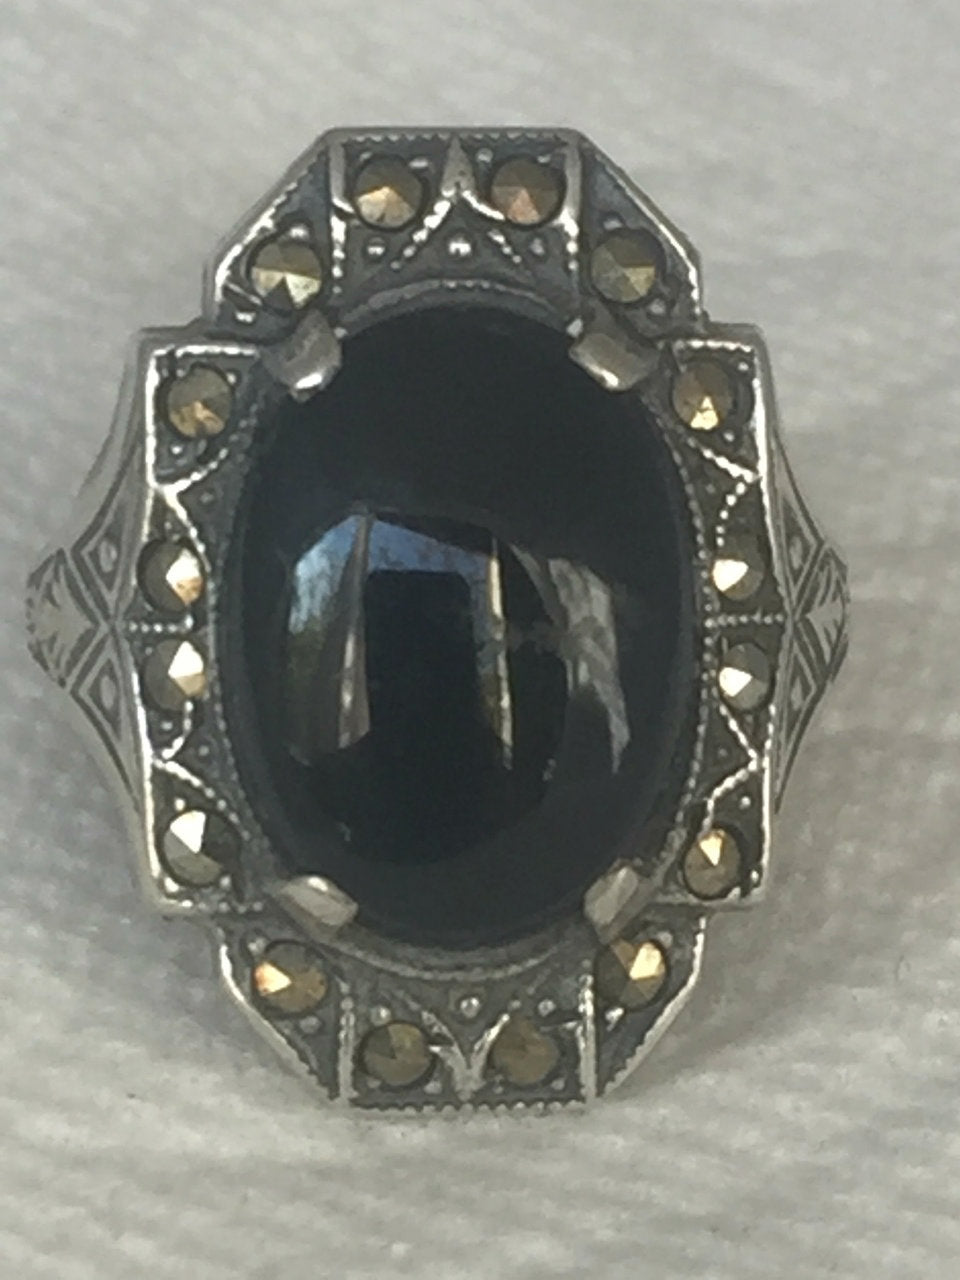 Vintage Sterling Silver Art Deco Onyx & Marcasite Ring Pinky  Size           5.25 Weight         4g Length         7/8" Width           1/2"